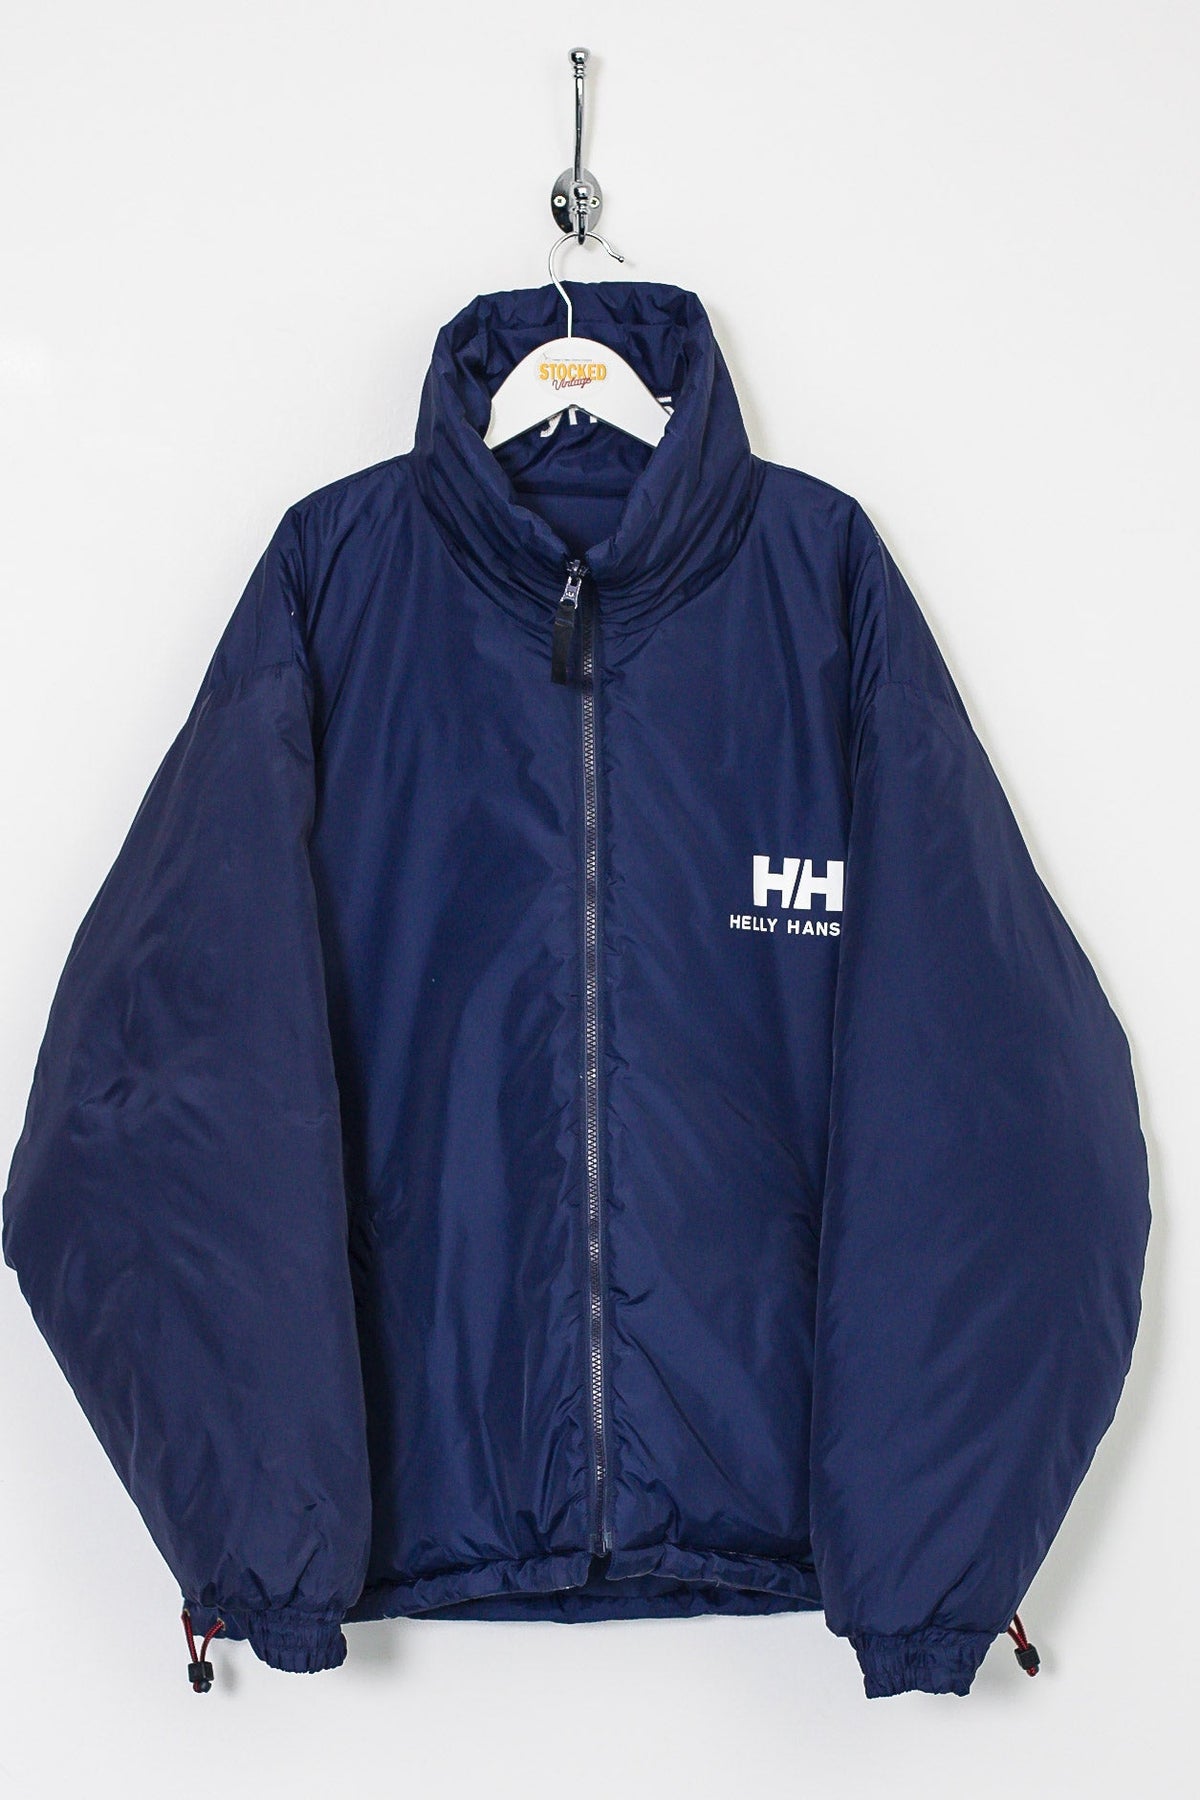 90s Helly Hansen Reversible Down Filled Puffer Jacket (L)